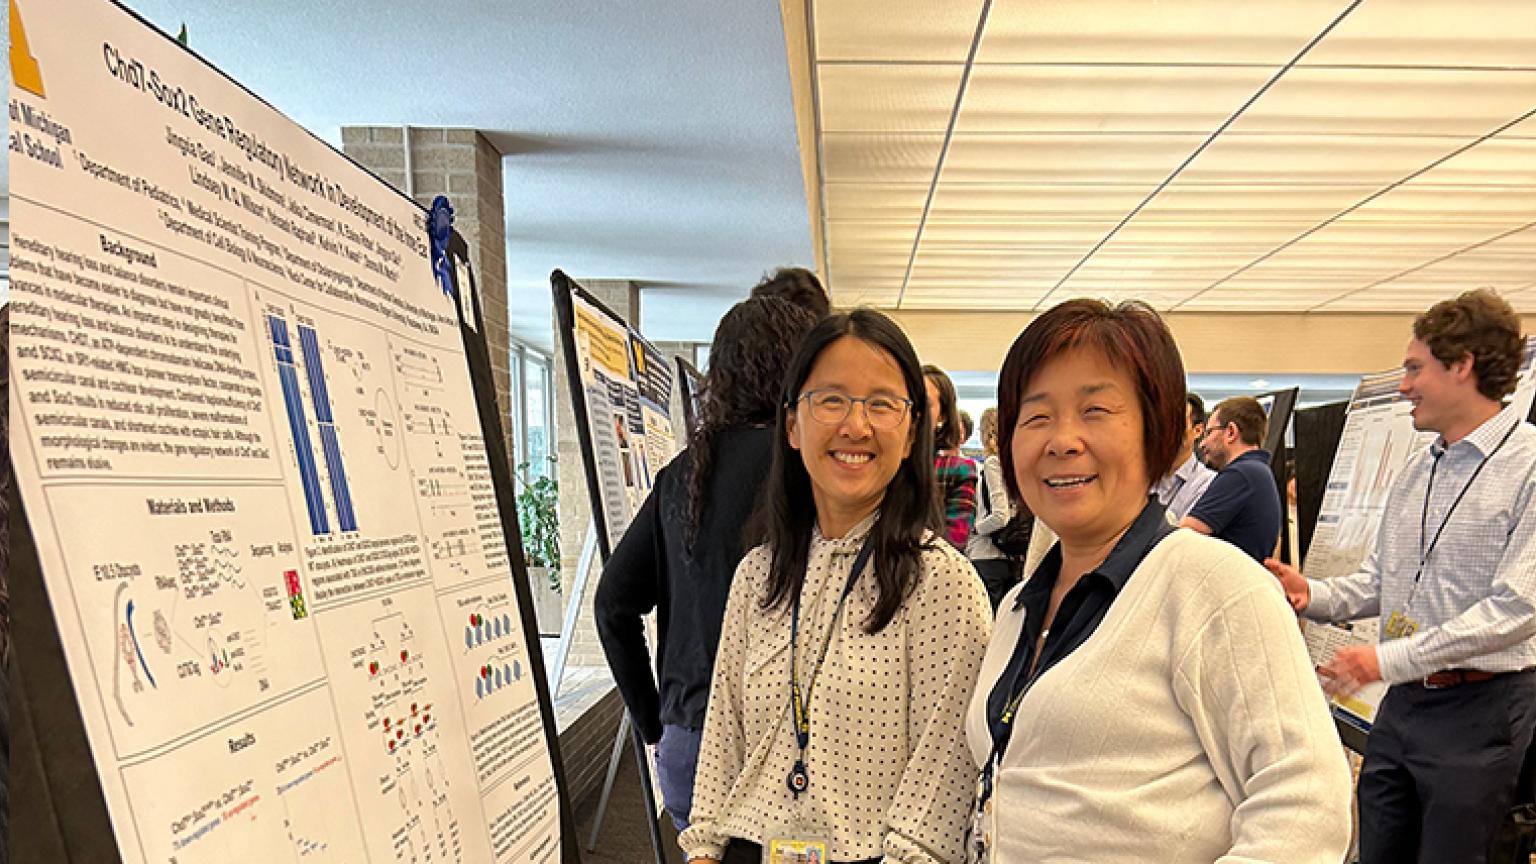 Researchers smiling and posing with presentation posters.